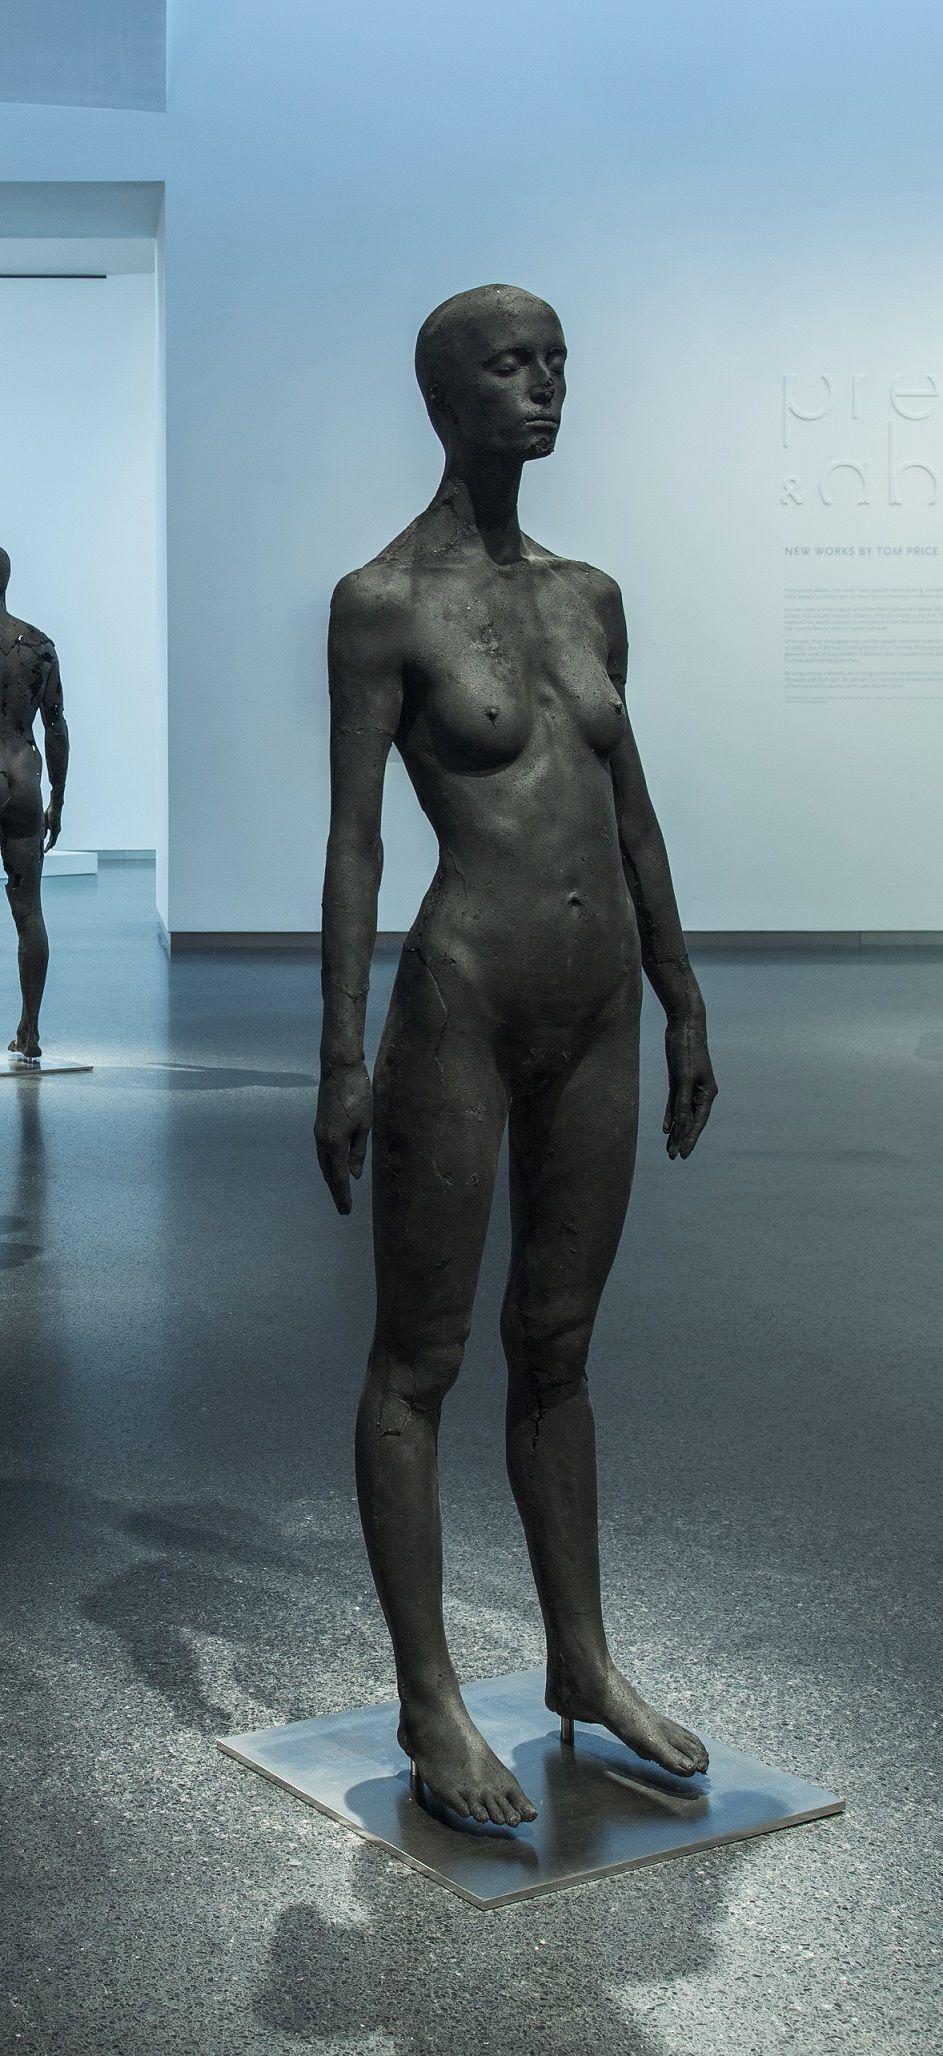 The Presence of Absence – Female (I) by Tom Price - Coal sculpture, nude body